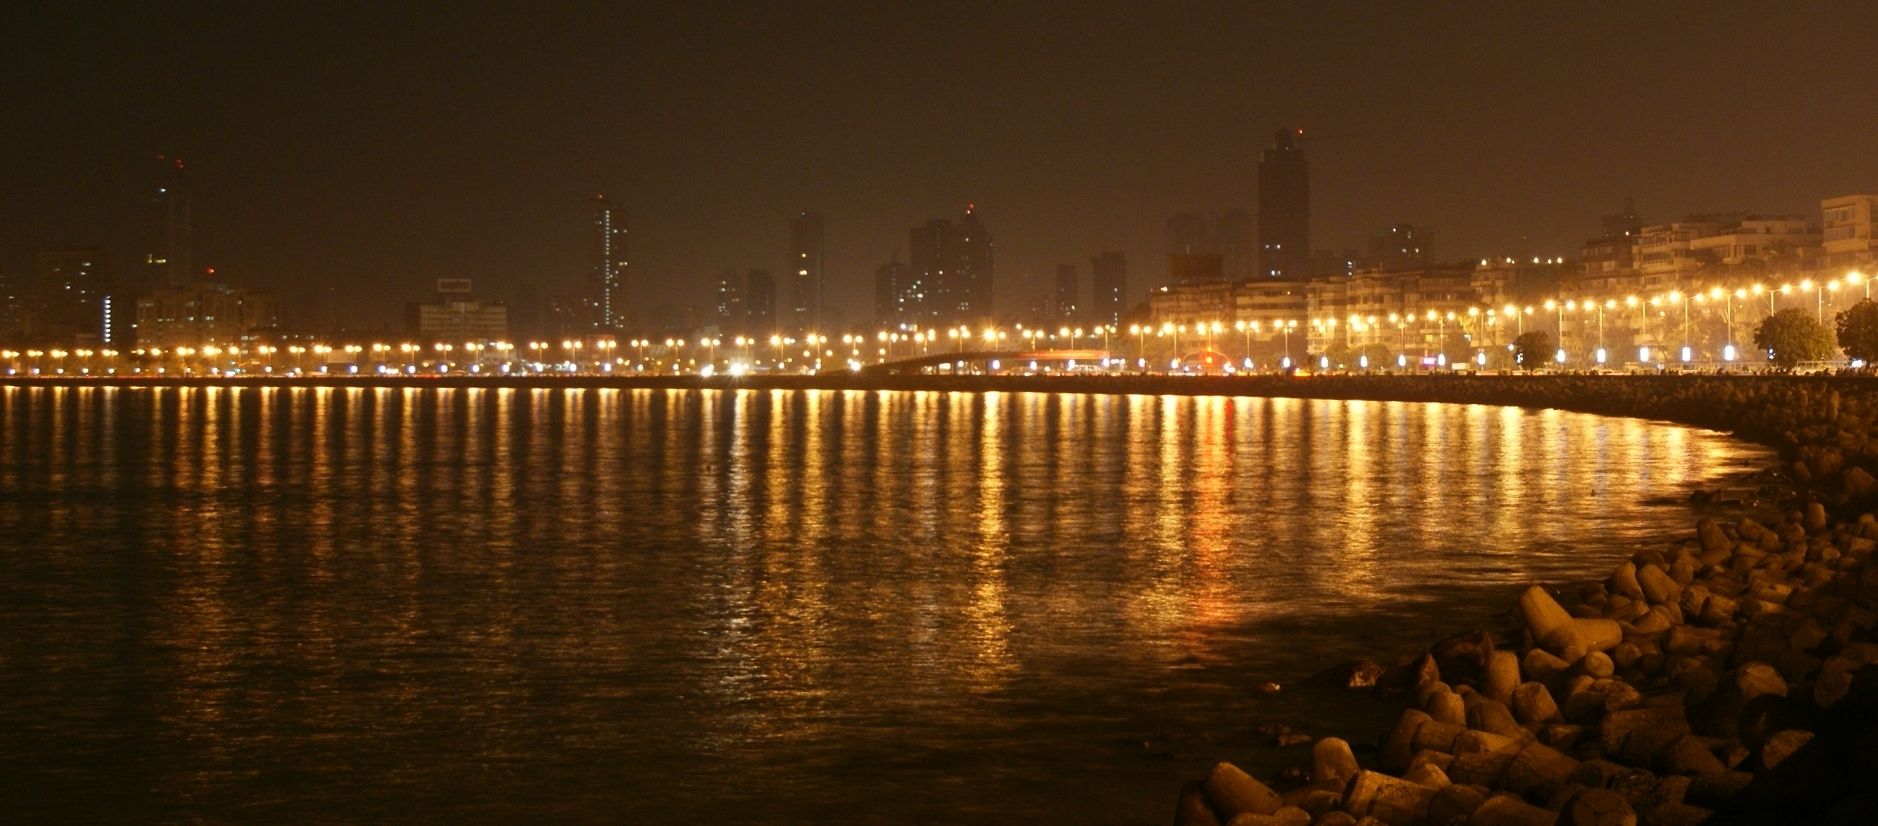 things about Marine Drive. Of Rantings and Musings